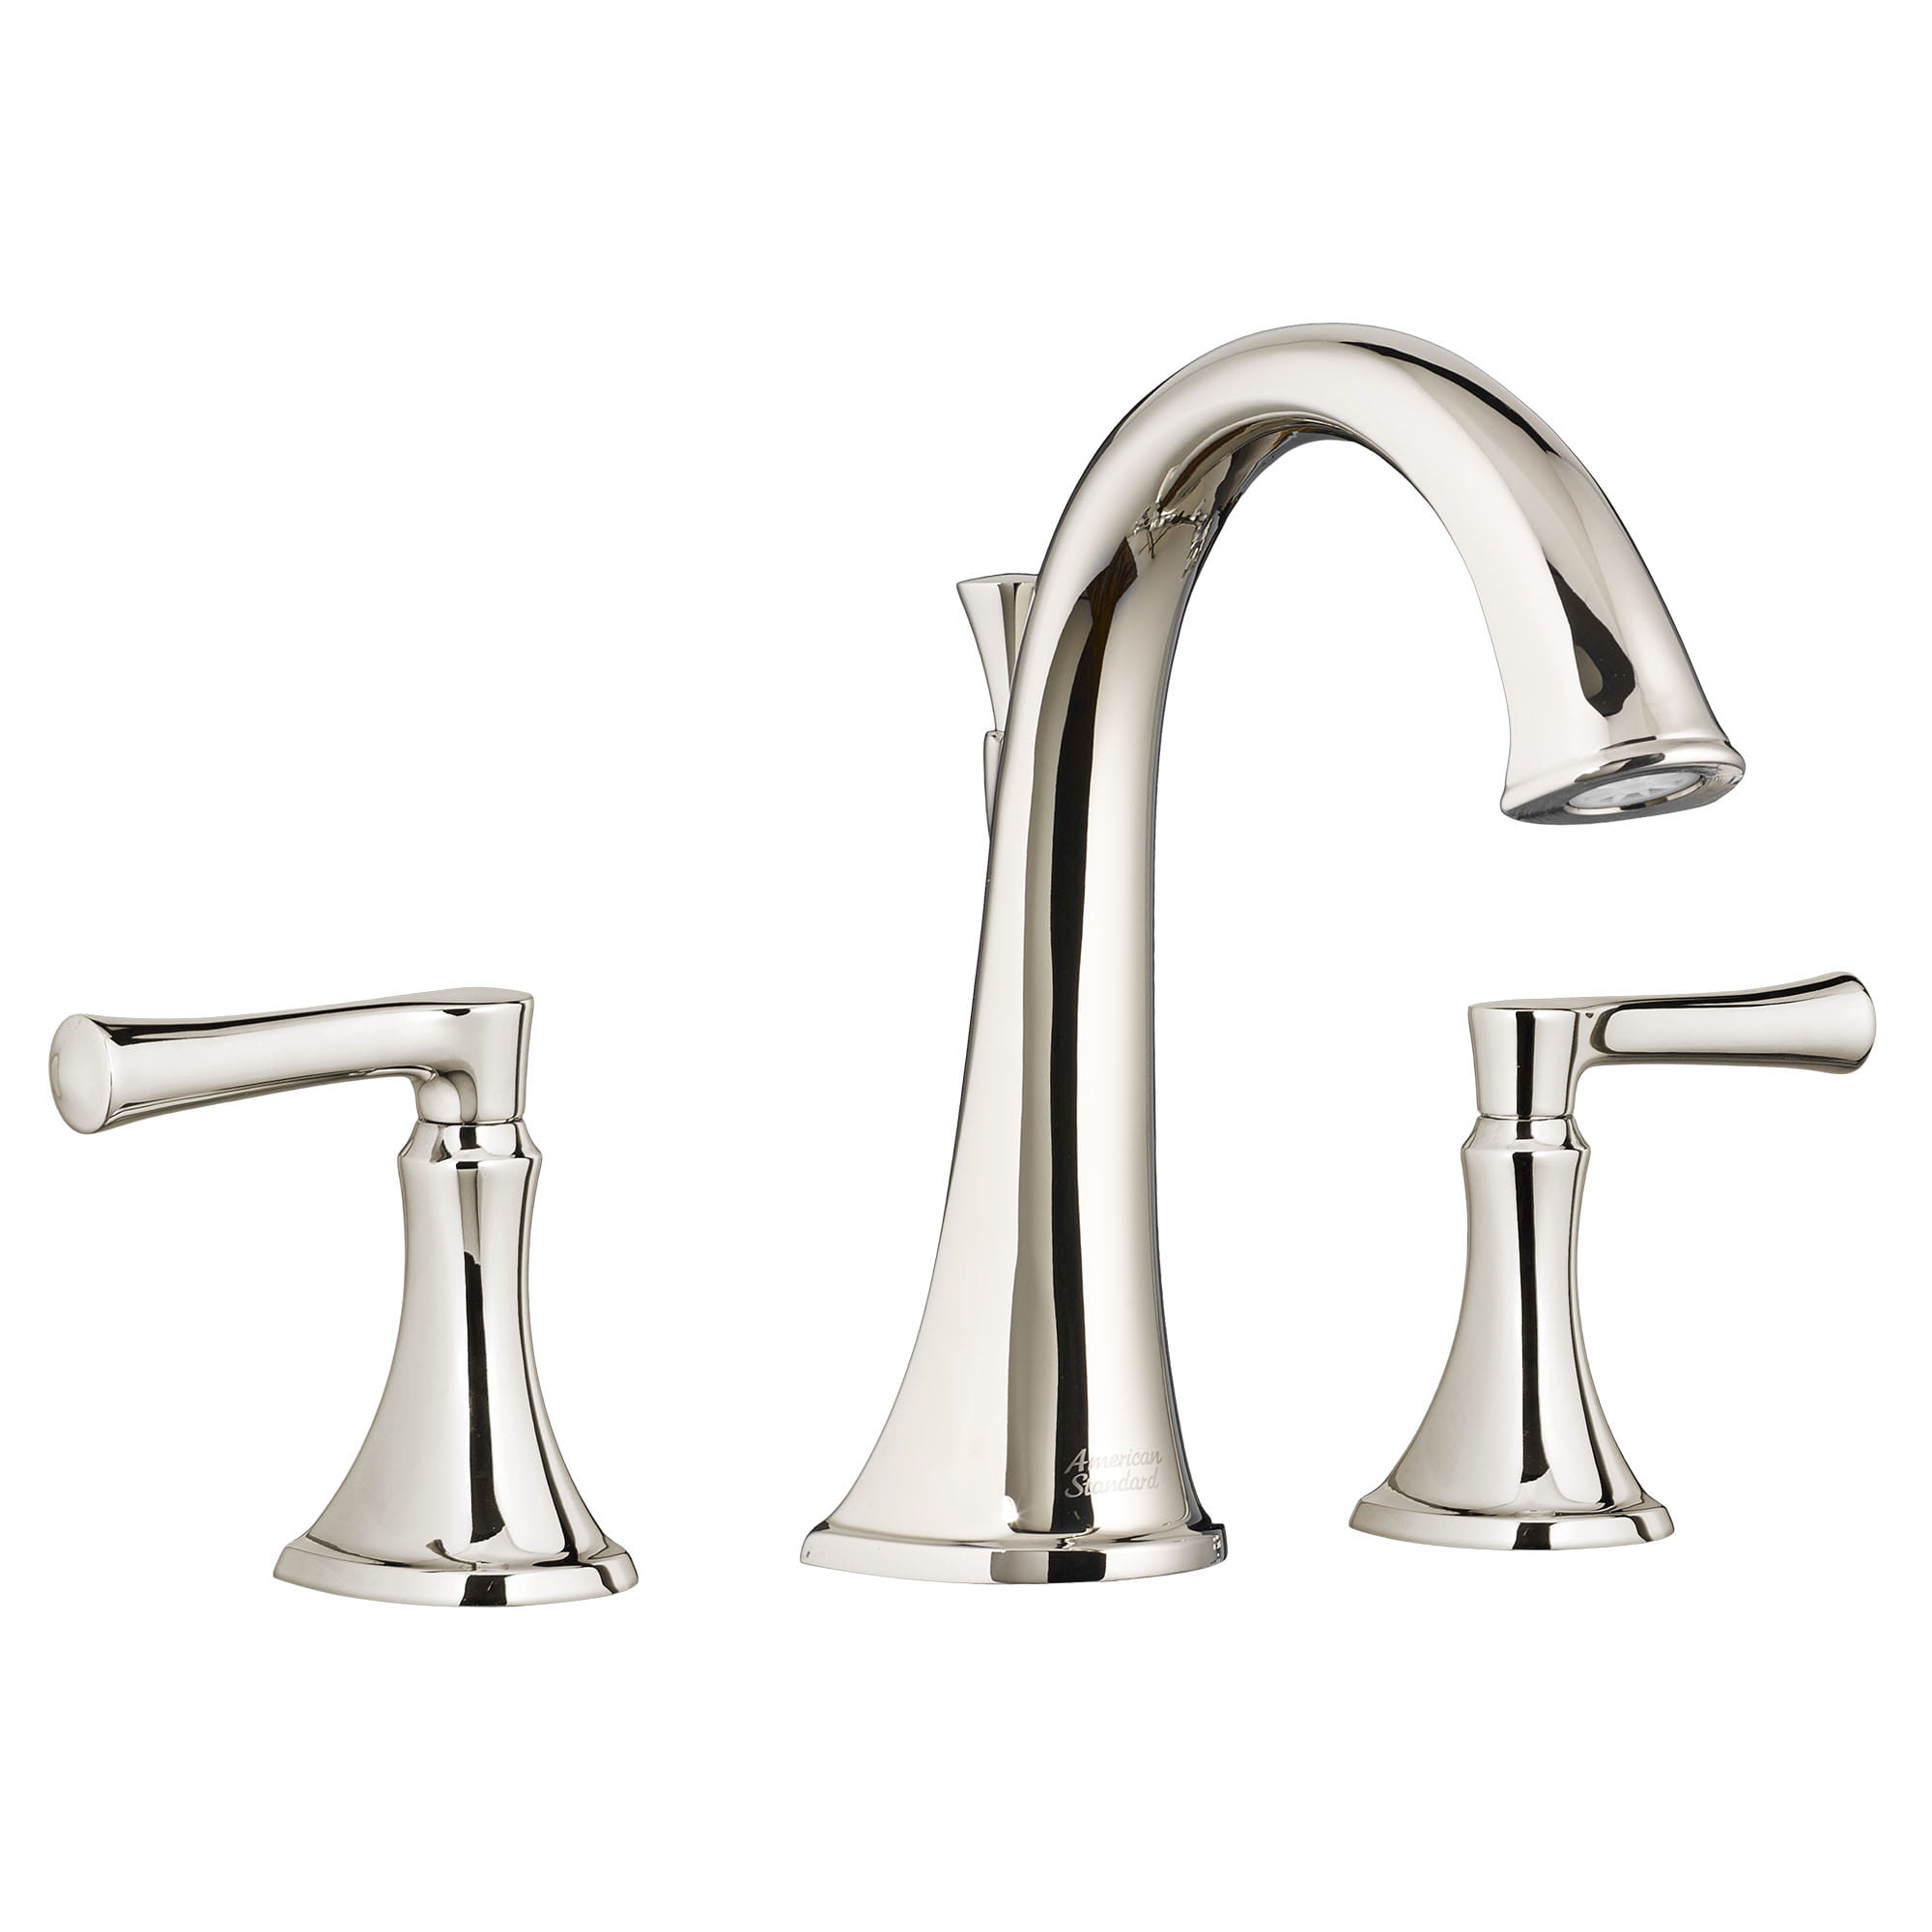 Estate Bathtub Faucet for Flash Rough In Valve With Lever Handles POLISHED  NICKEL